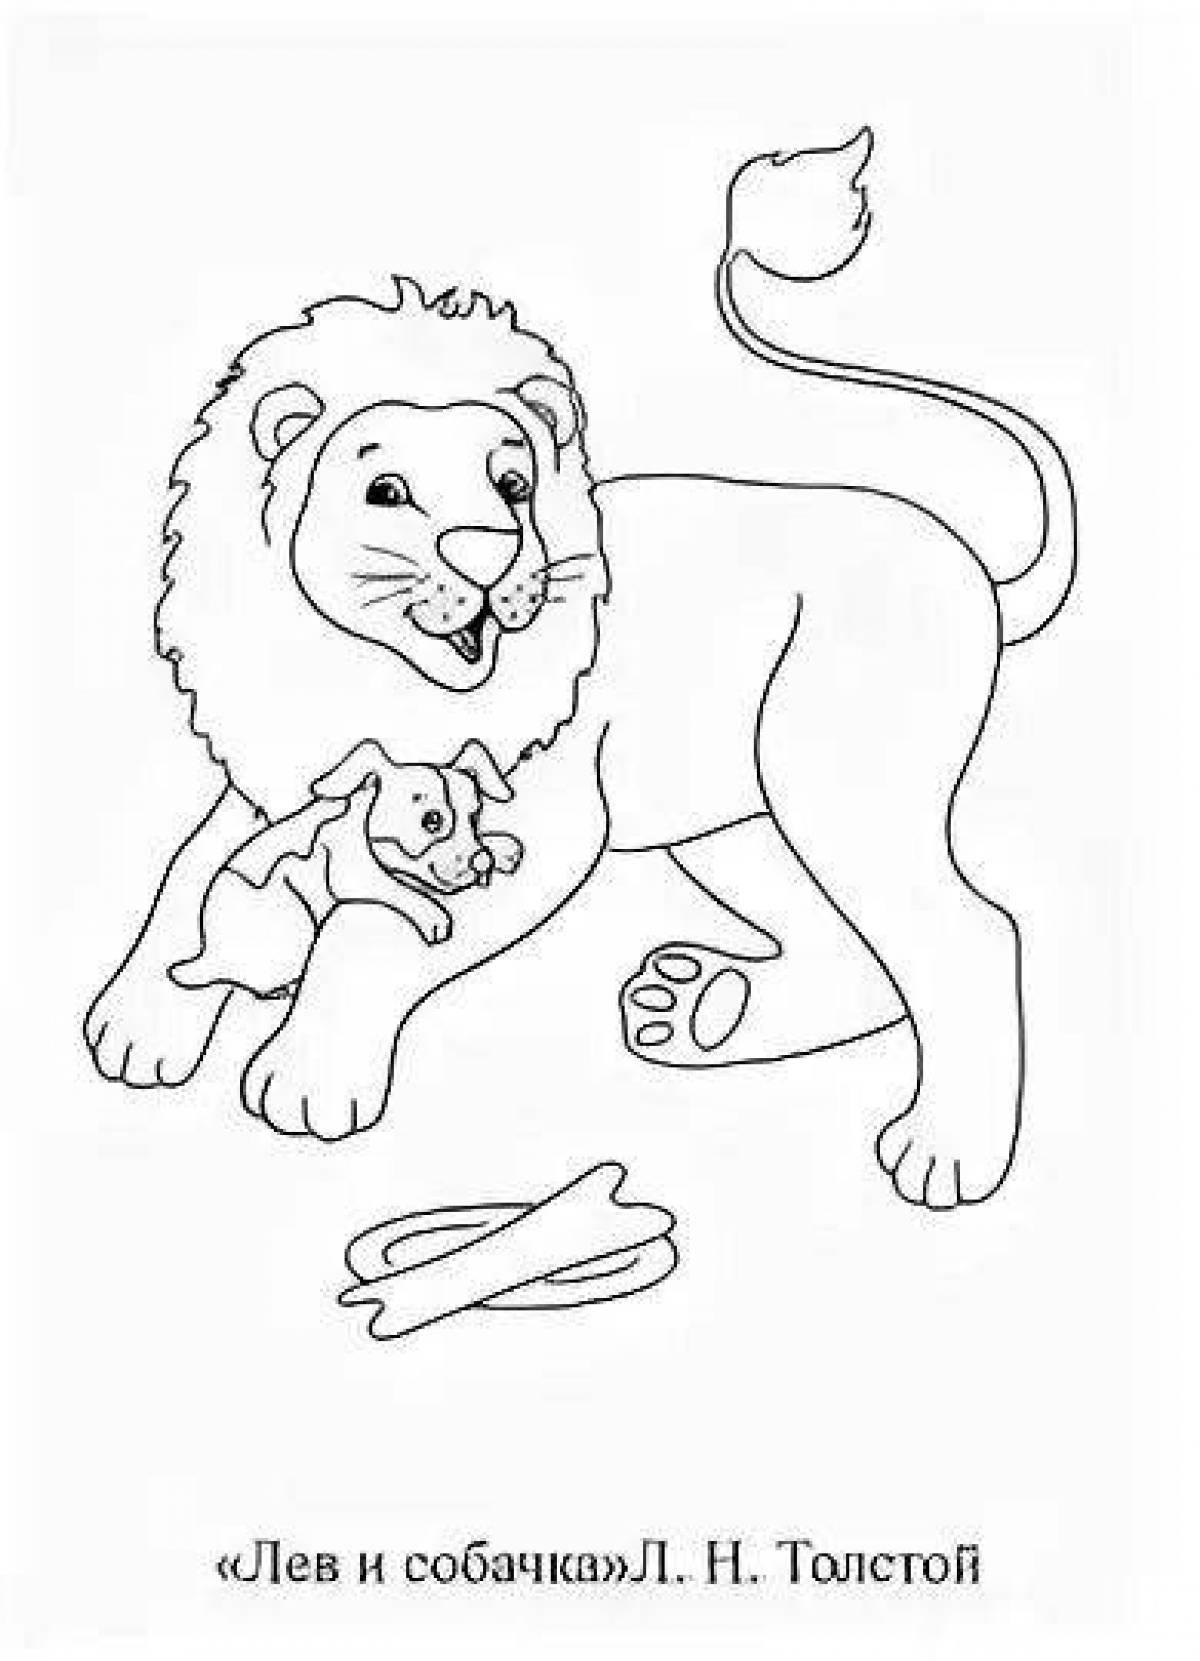 Affectionate dog coloring page